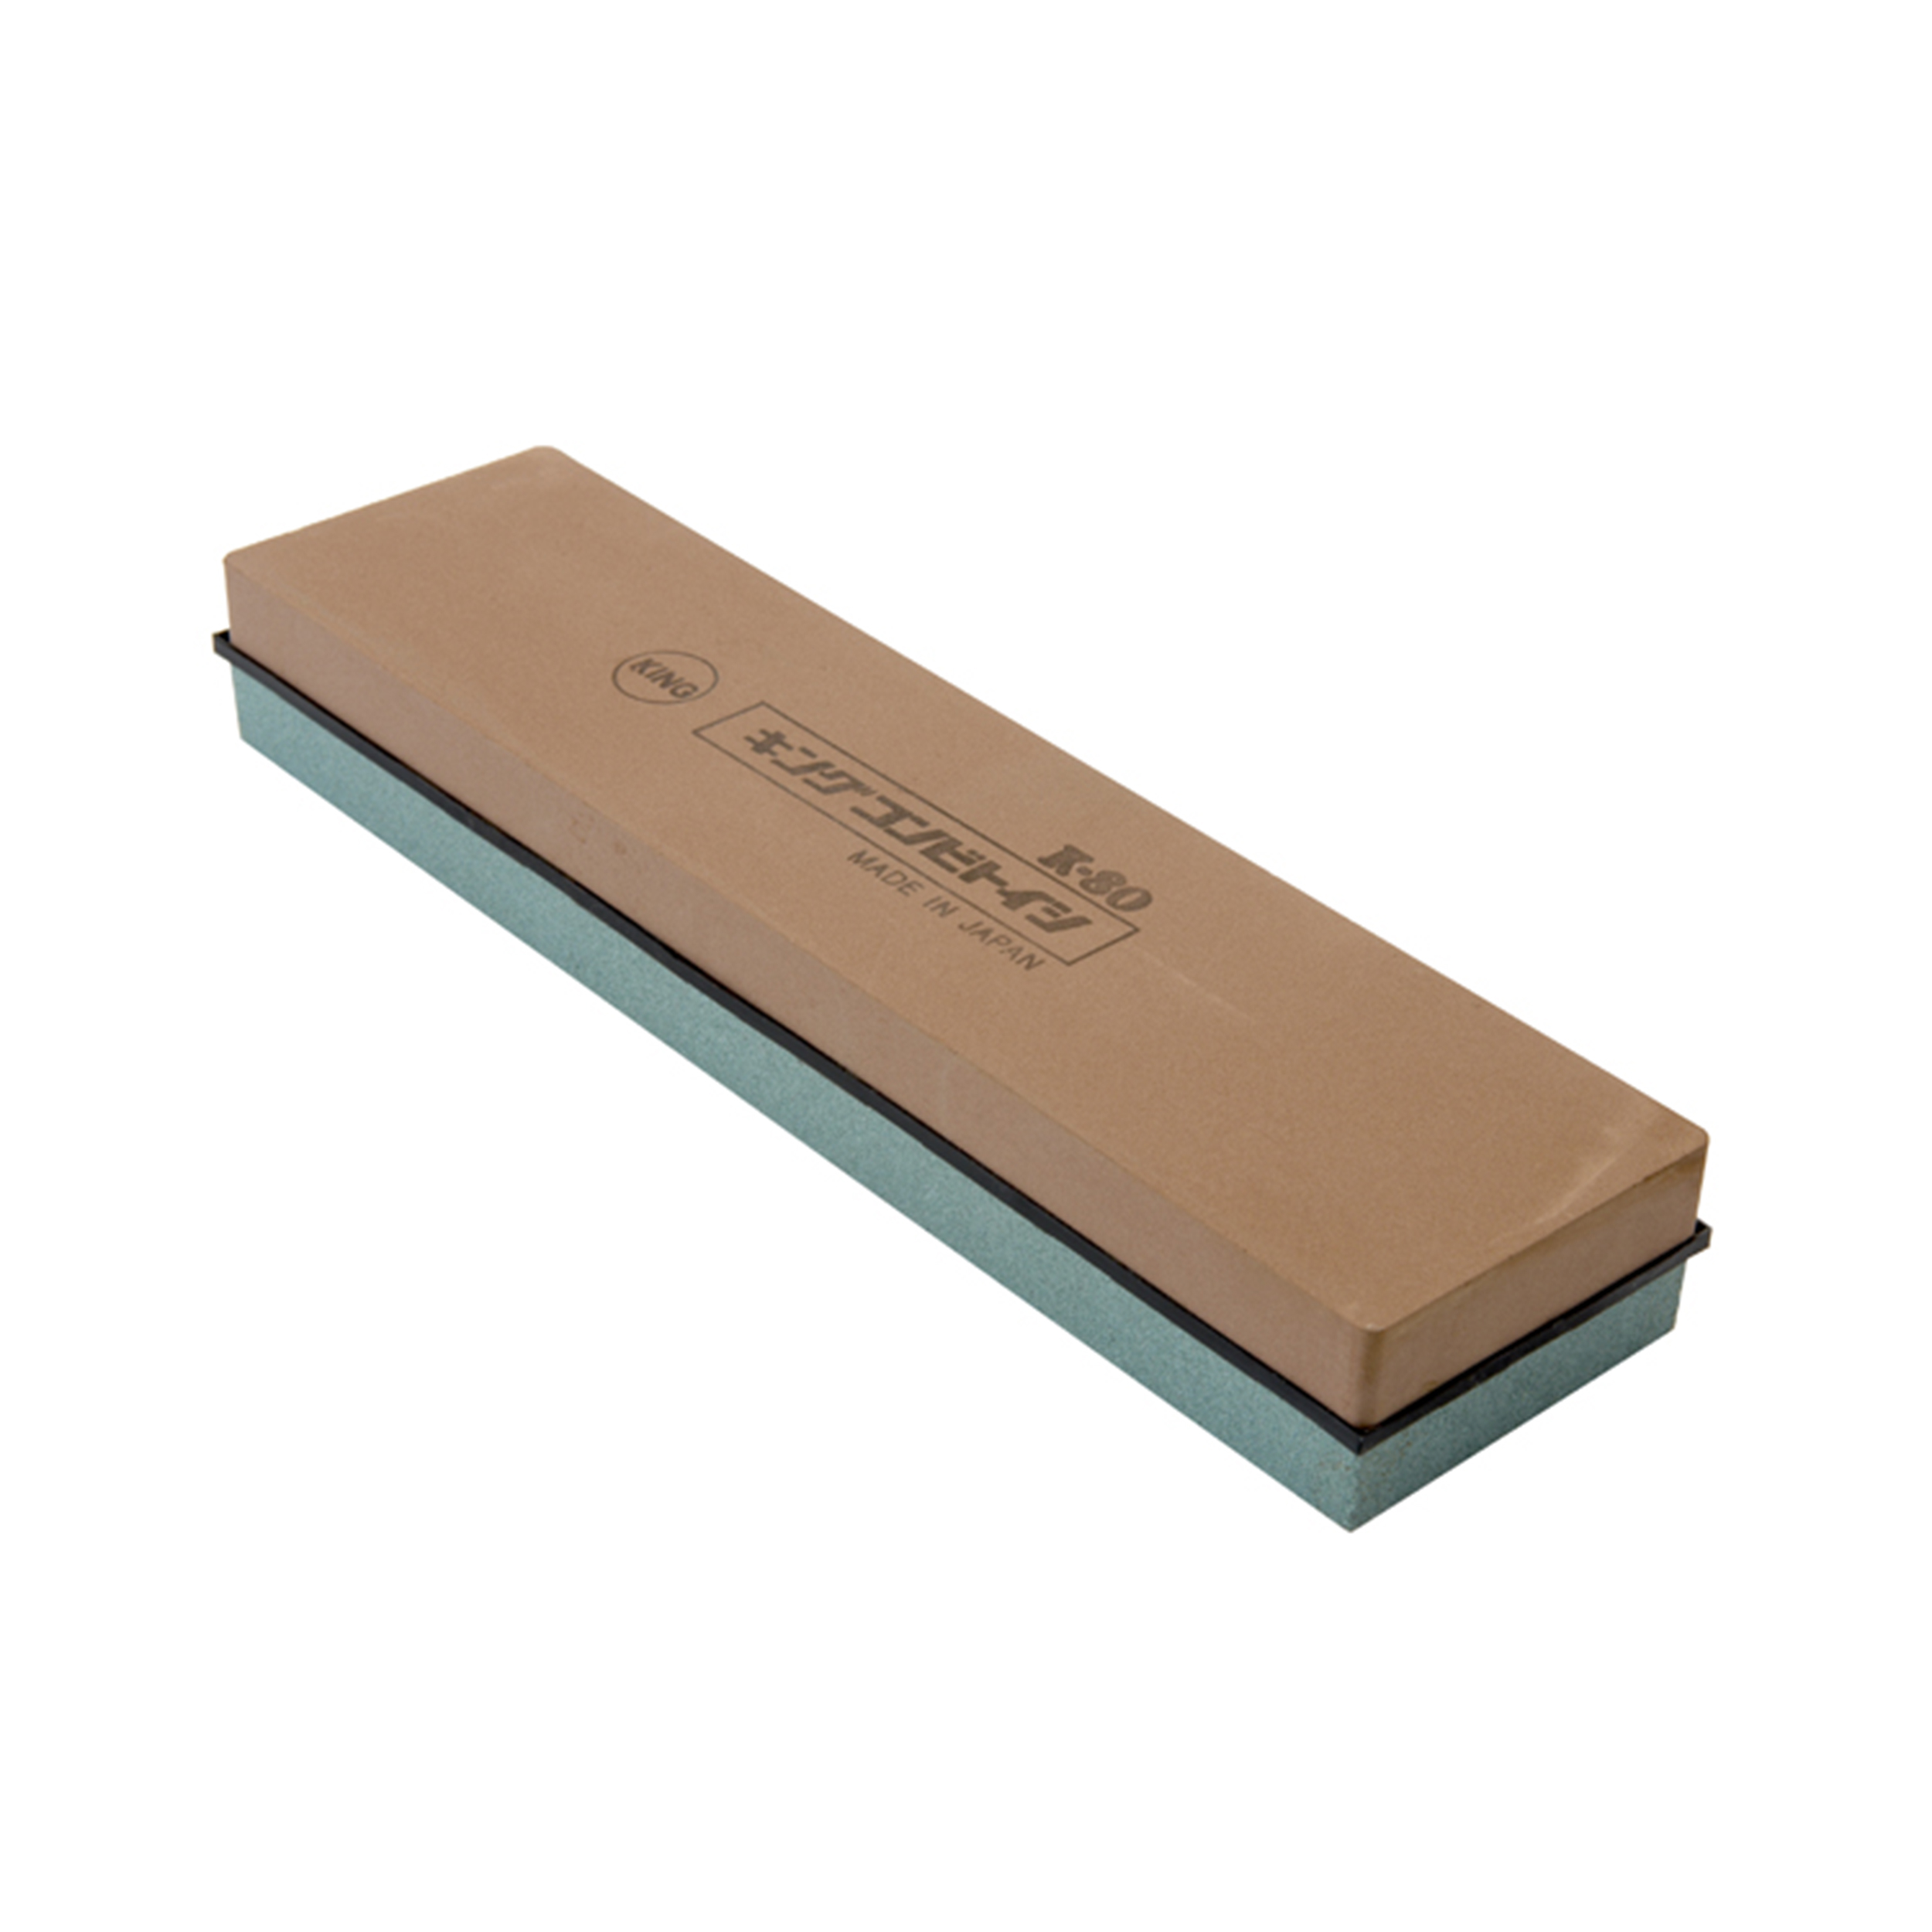 Combination Waterstone, 8" X 2" X 1", 250/1000 Grit